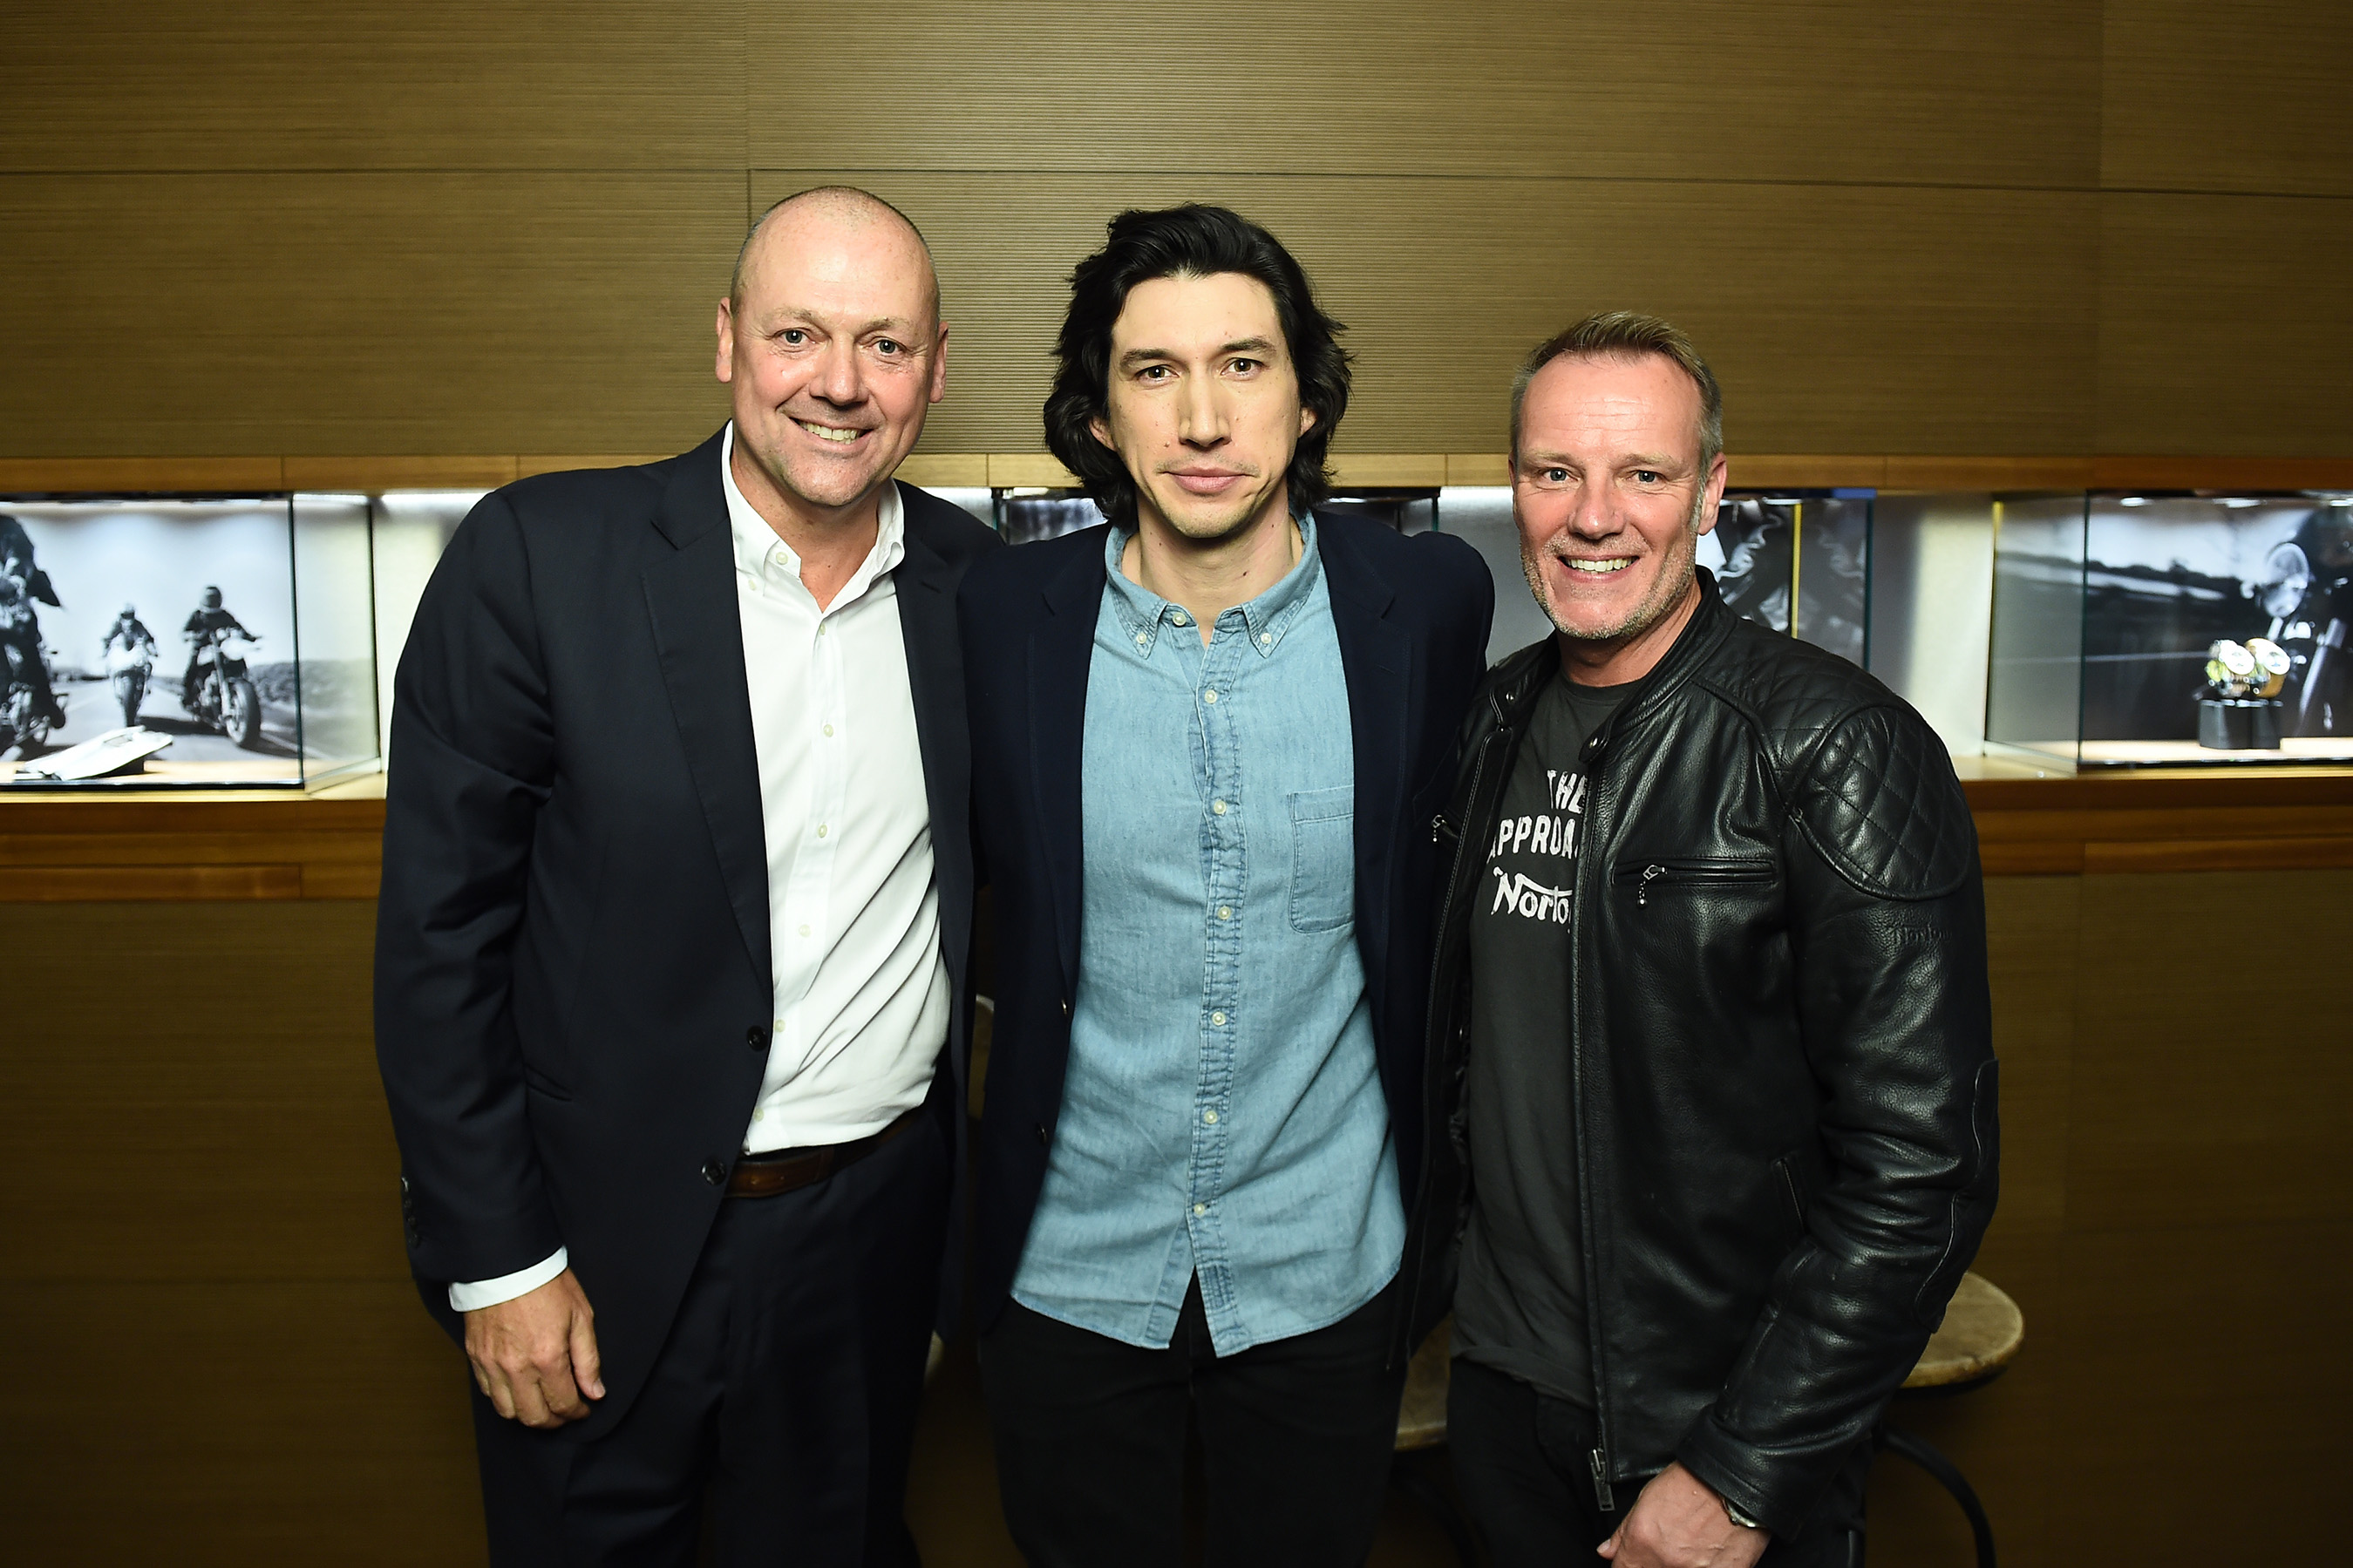 The Breitling Premier Norton Edition Arrives In New York At An Exclusive Event Hosted By Breitling Cinema Squad Member Adam Driver